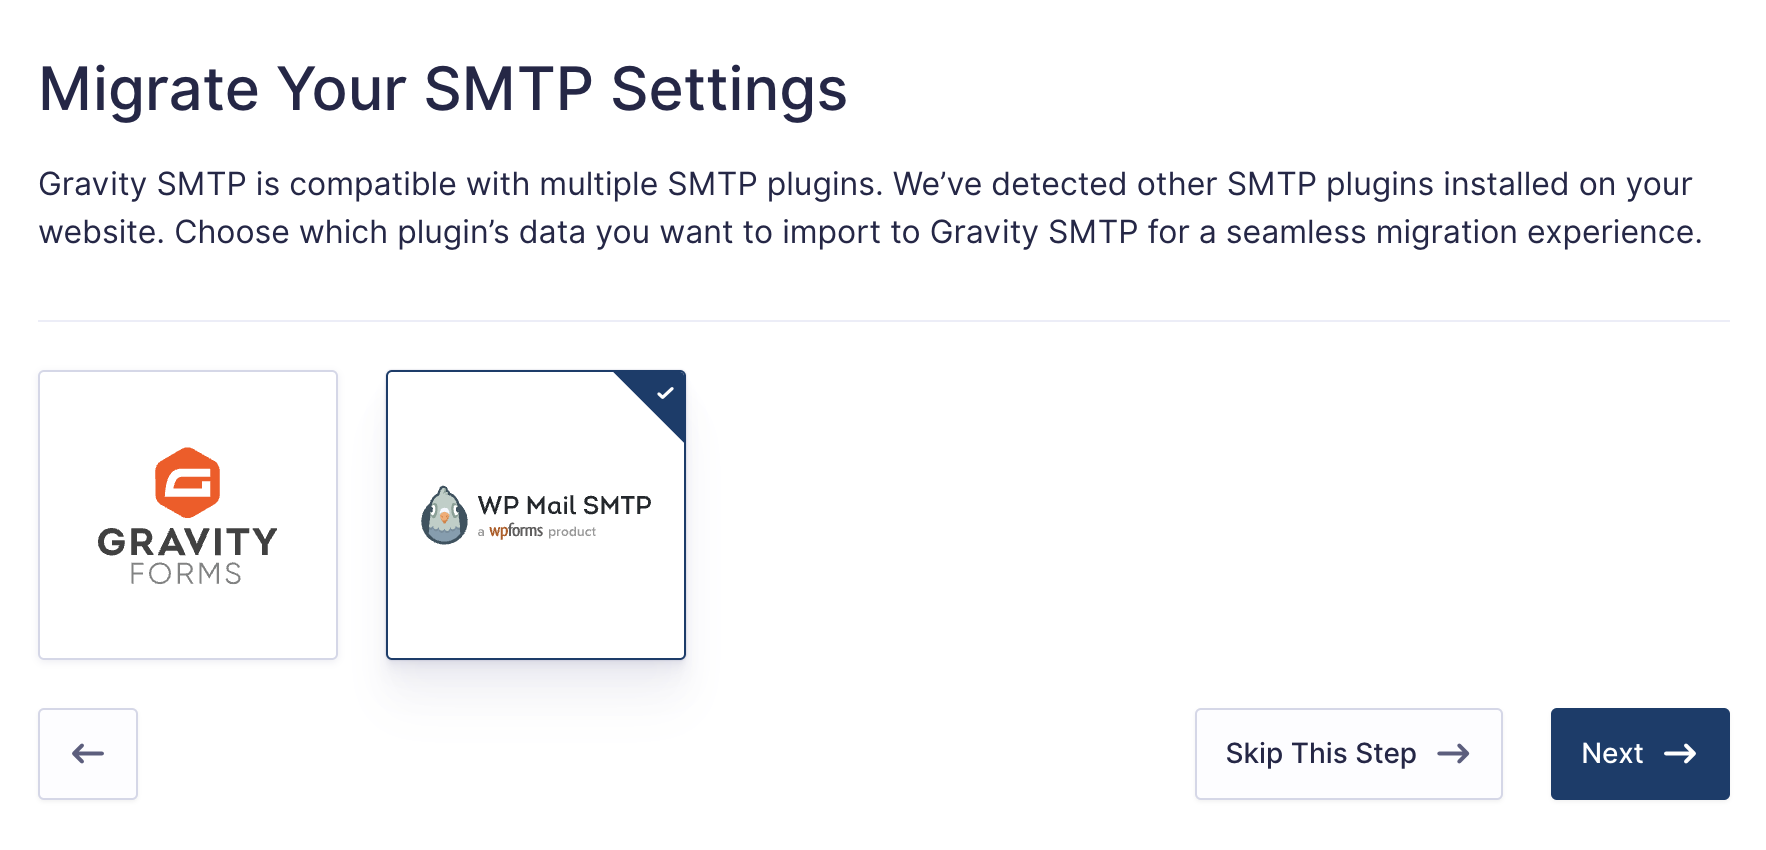 Image showing available migrations for Gravity SMTP